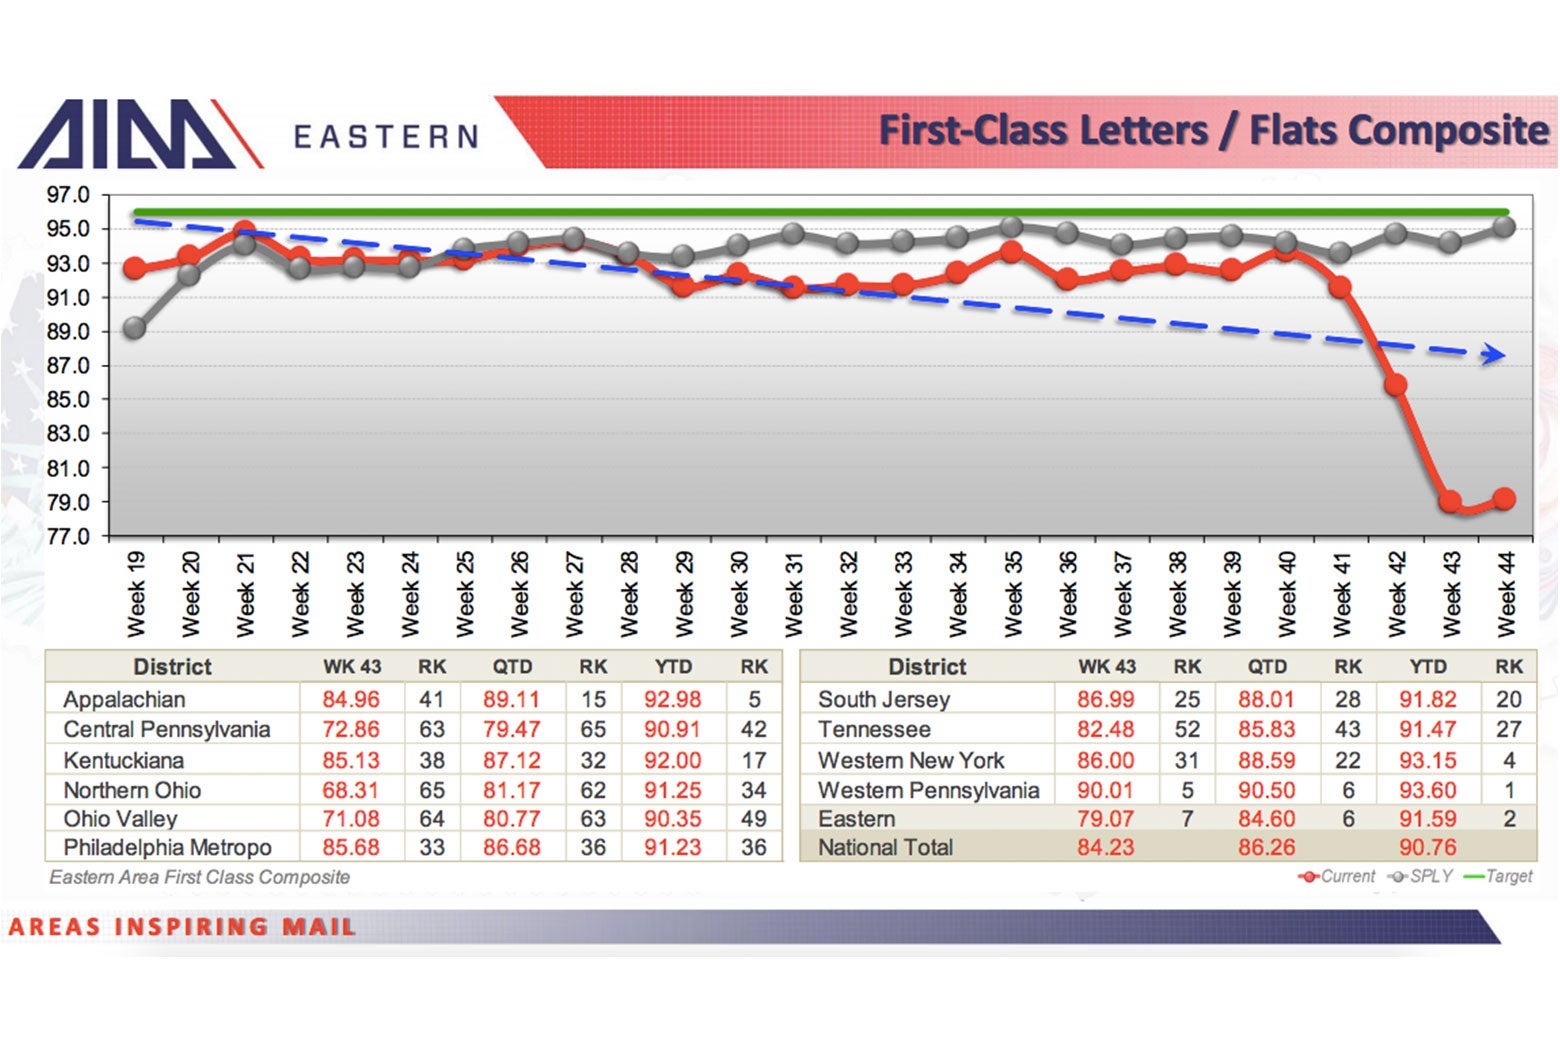 Declines in first-class mail delivery in the Eastern U.S.